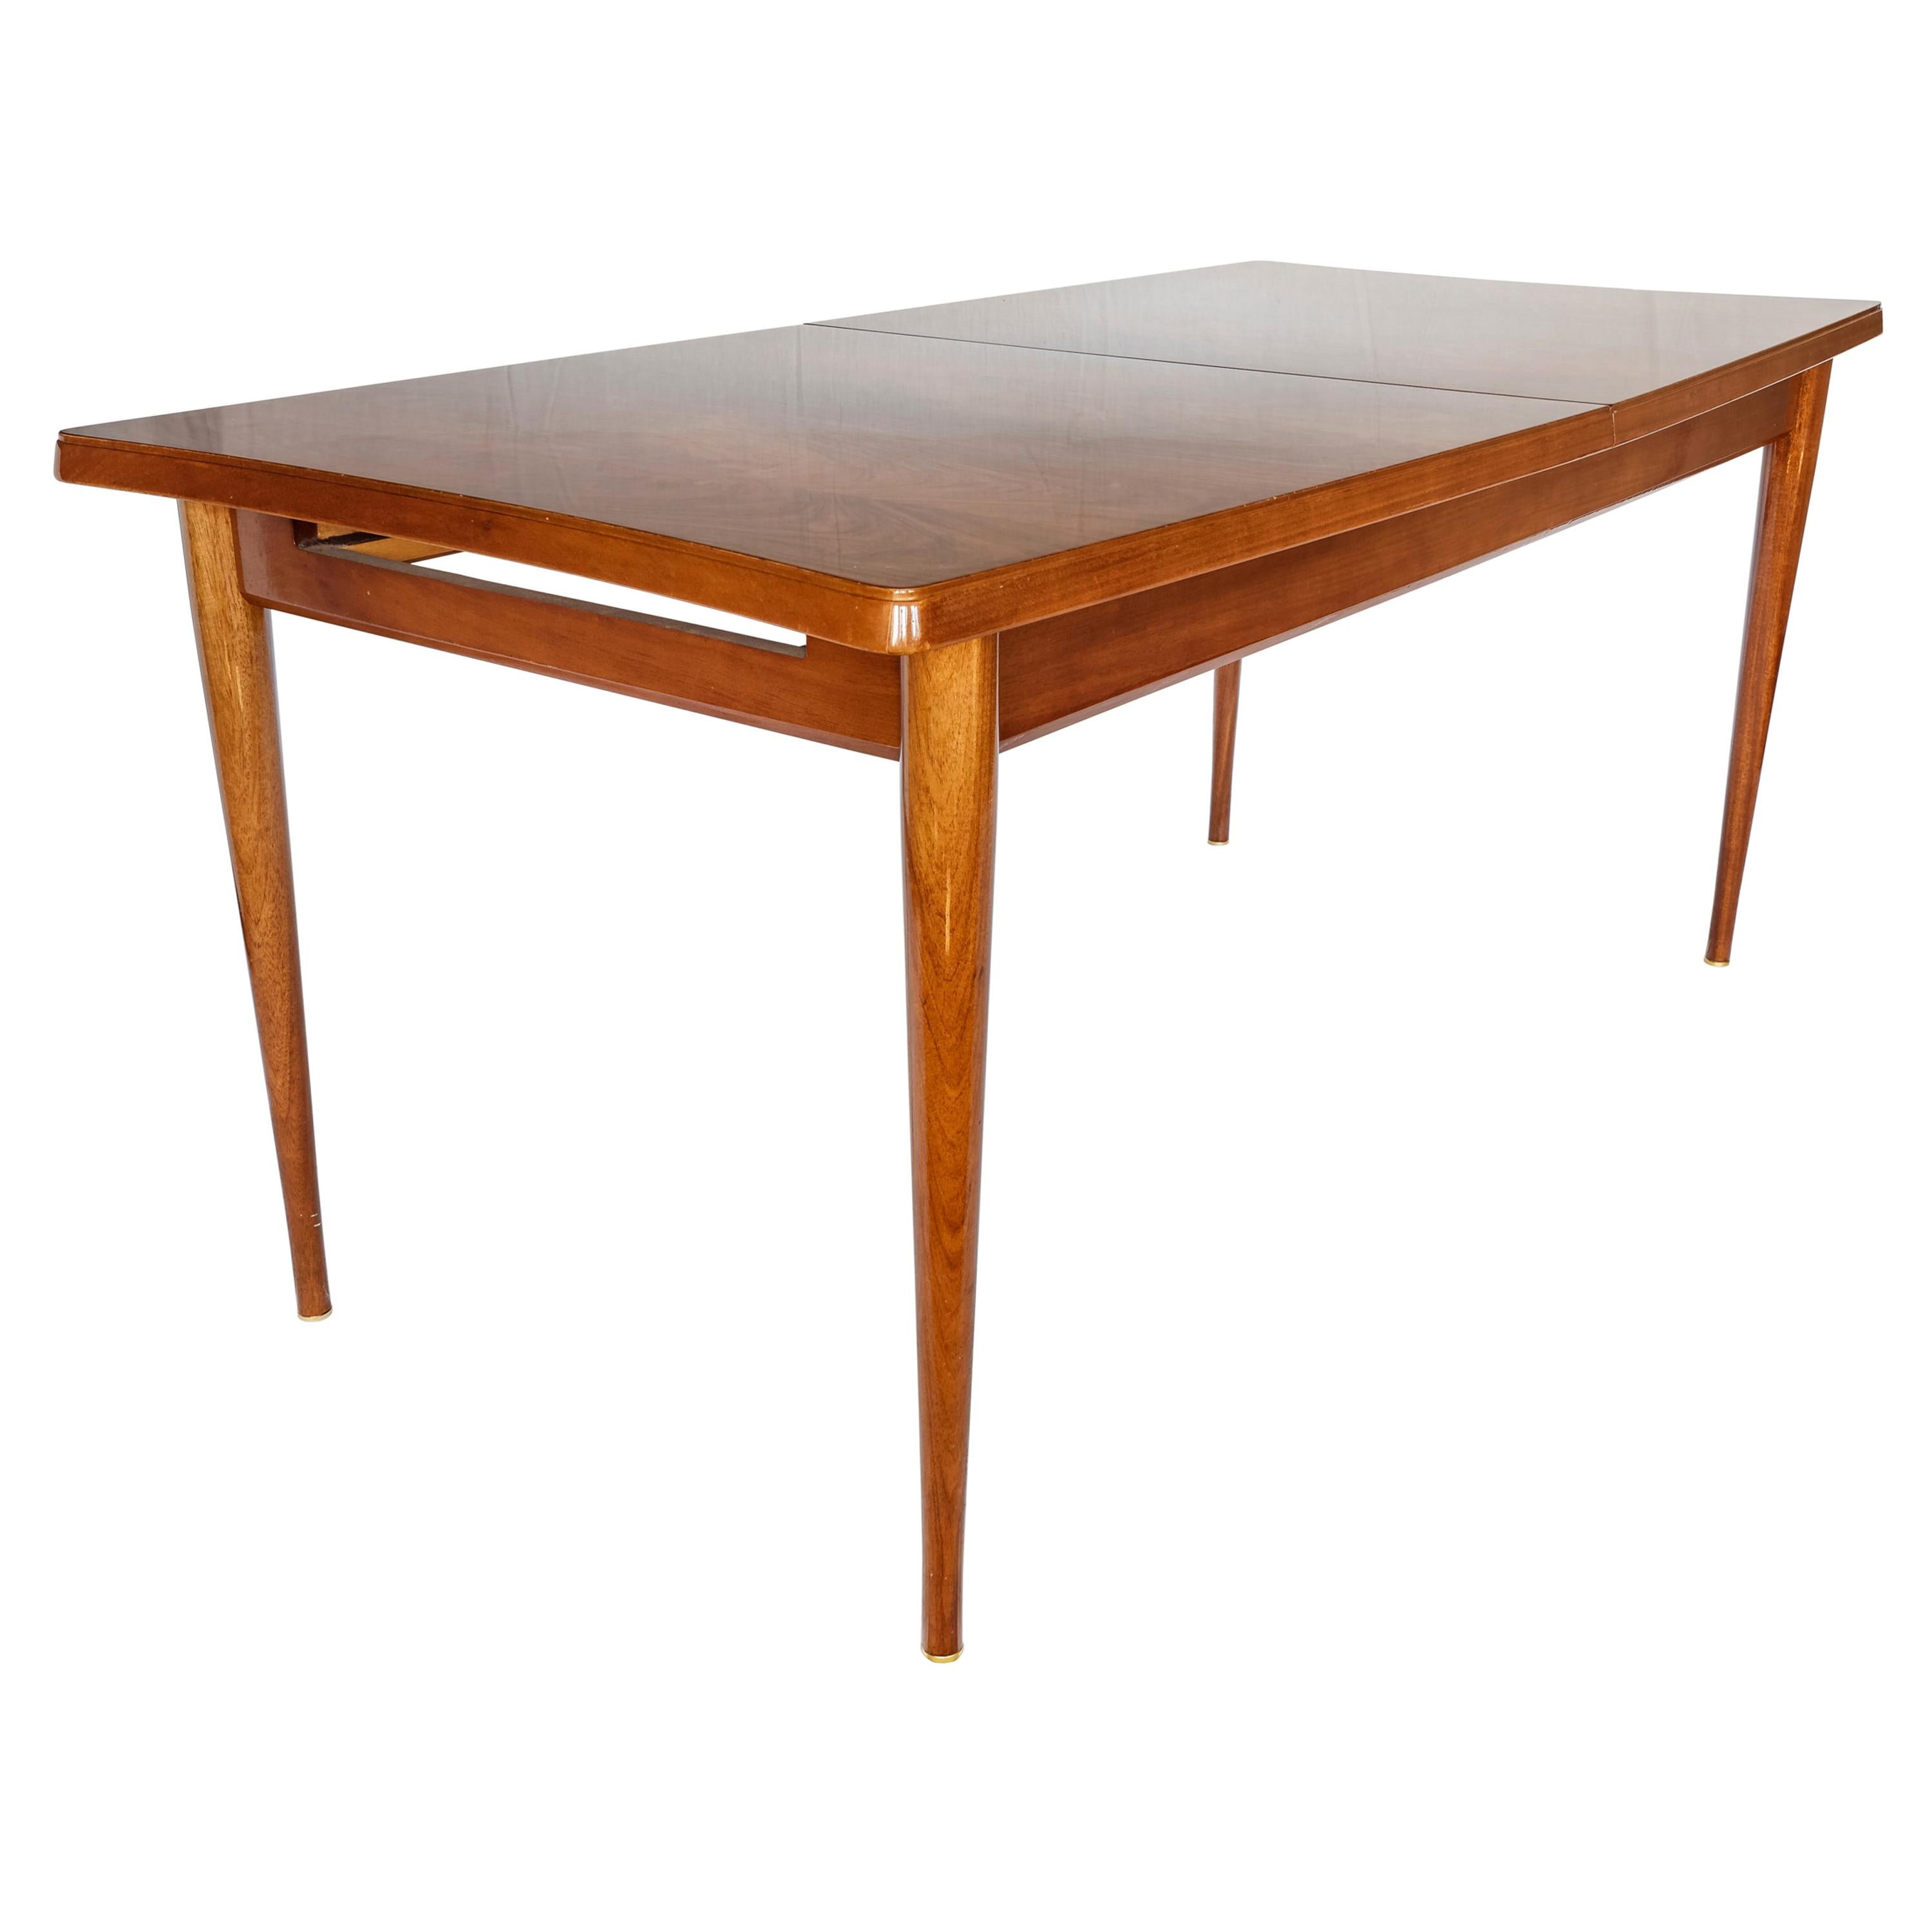 Midcentury Rosewood Extensible Dinning Table L. Layton & M. Lazarus for Uniflex